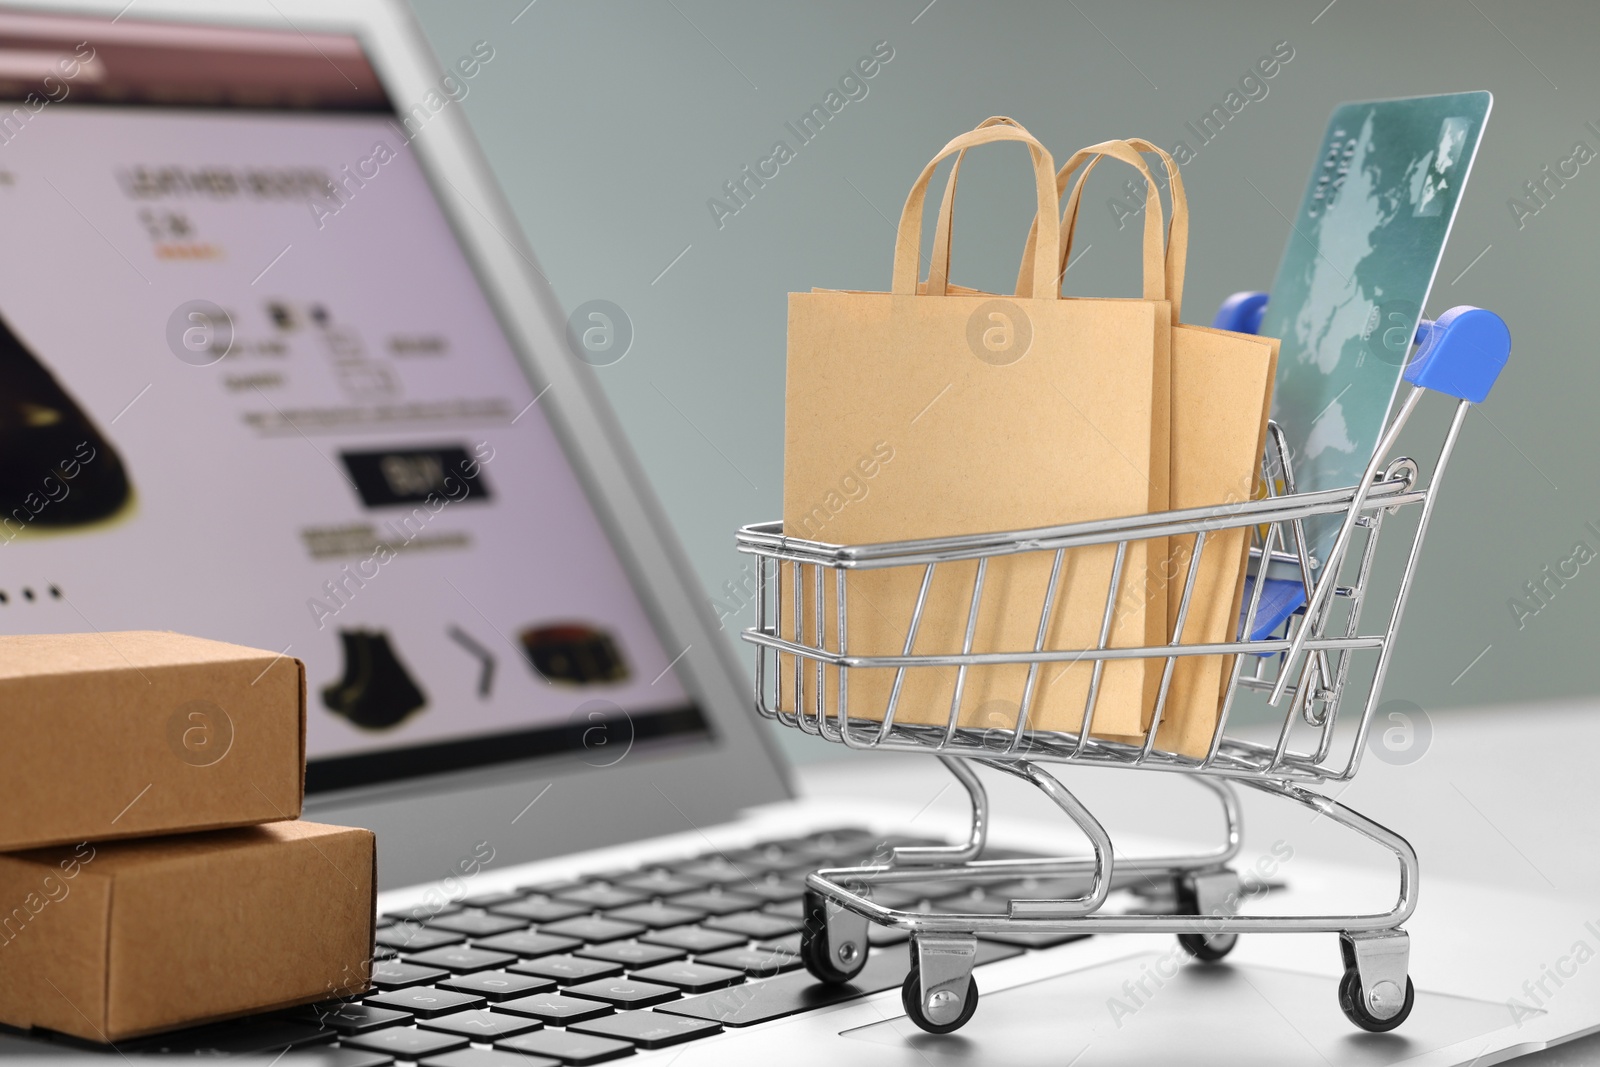 Photo of Mini shopping bags, credit card, cart and boxes on laptop against light grey background, closeup. Online store